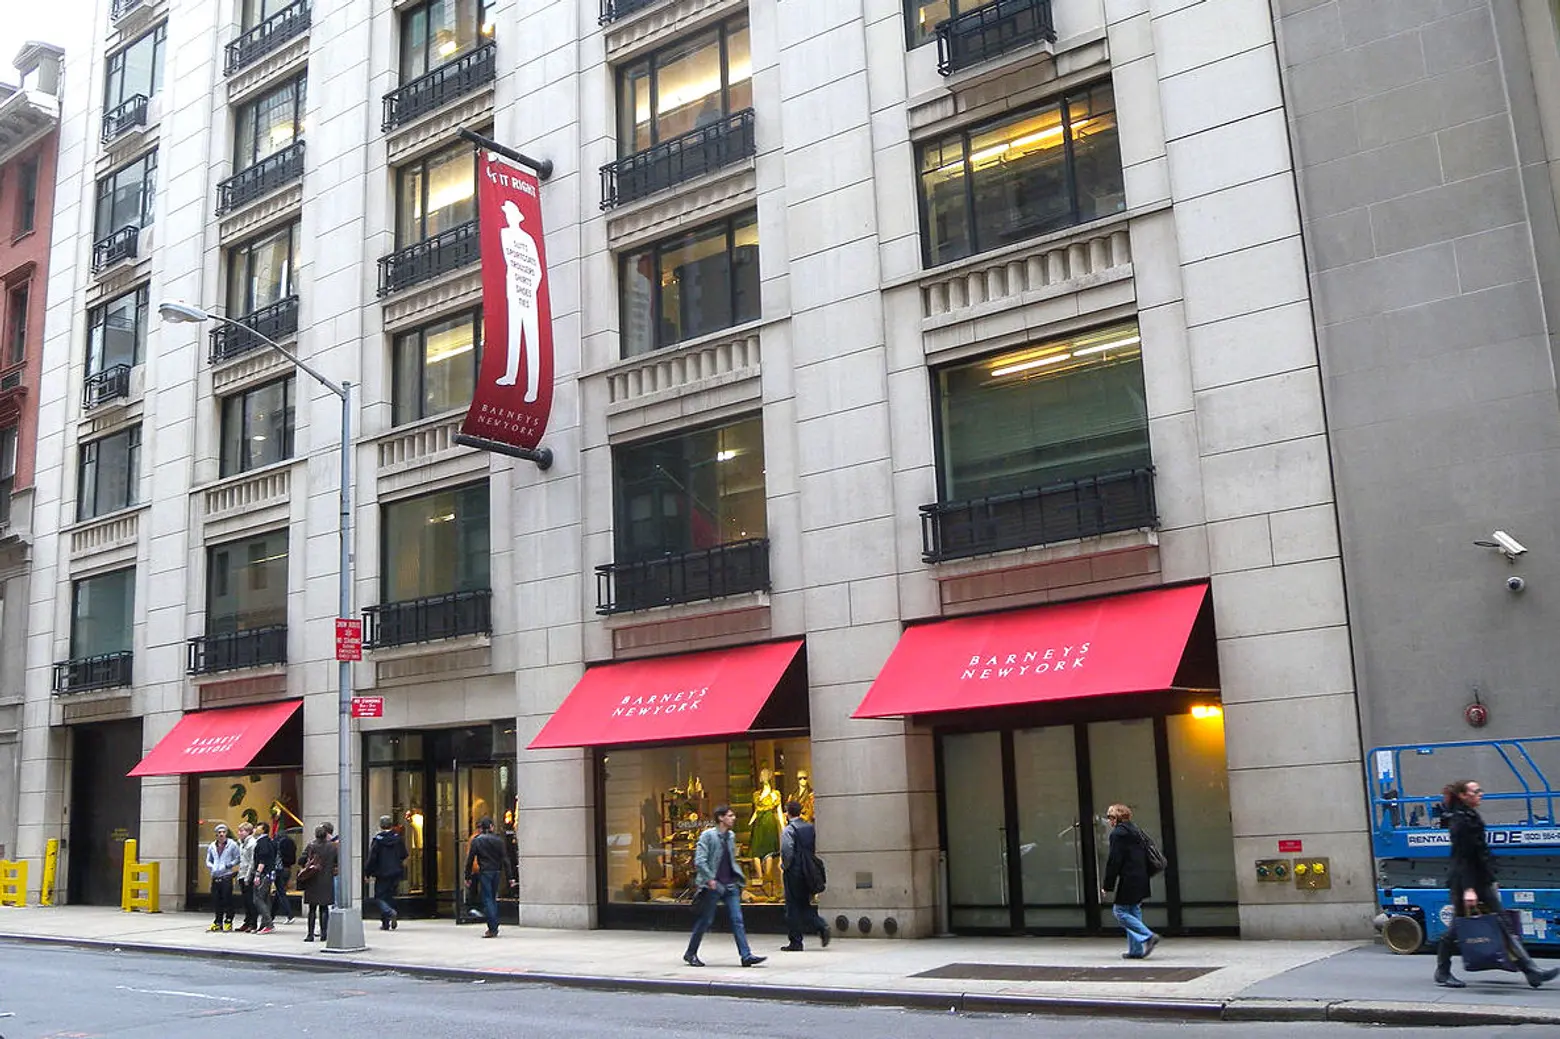 Eataly looks to buy or lease part of shuttered Barneys flagship